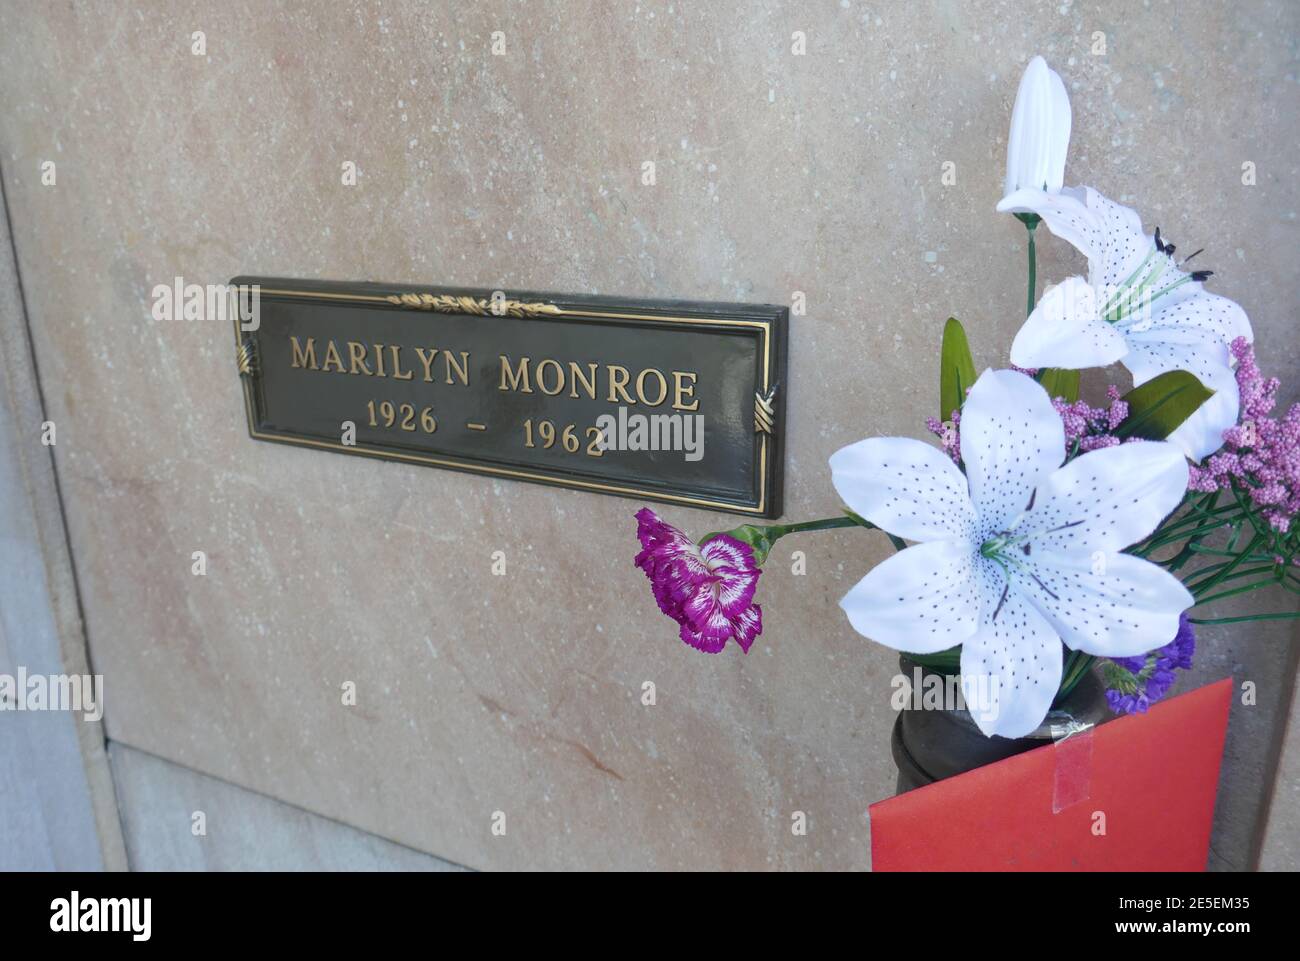 Los Angeles, California, USA 26th January 2021 A general view of atmosphere of actress Marilyn Monroe's grave at Pierce Brothers Westwood Village Memorial Park on January 26, 2021 in Los Angeles, California, USA. Photo by Barry King/Alamy Stock Photo Stock Photo